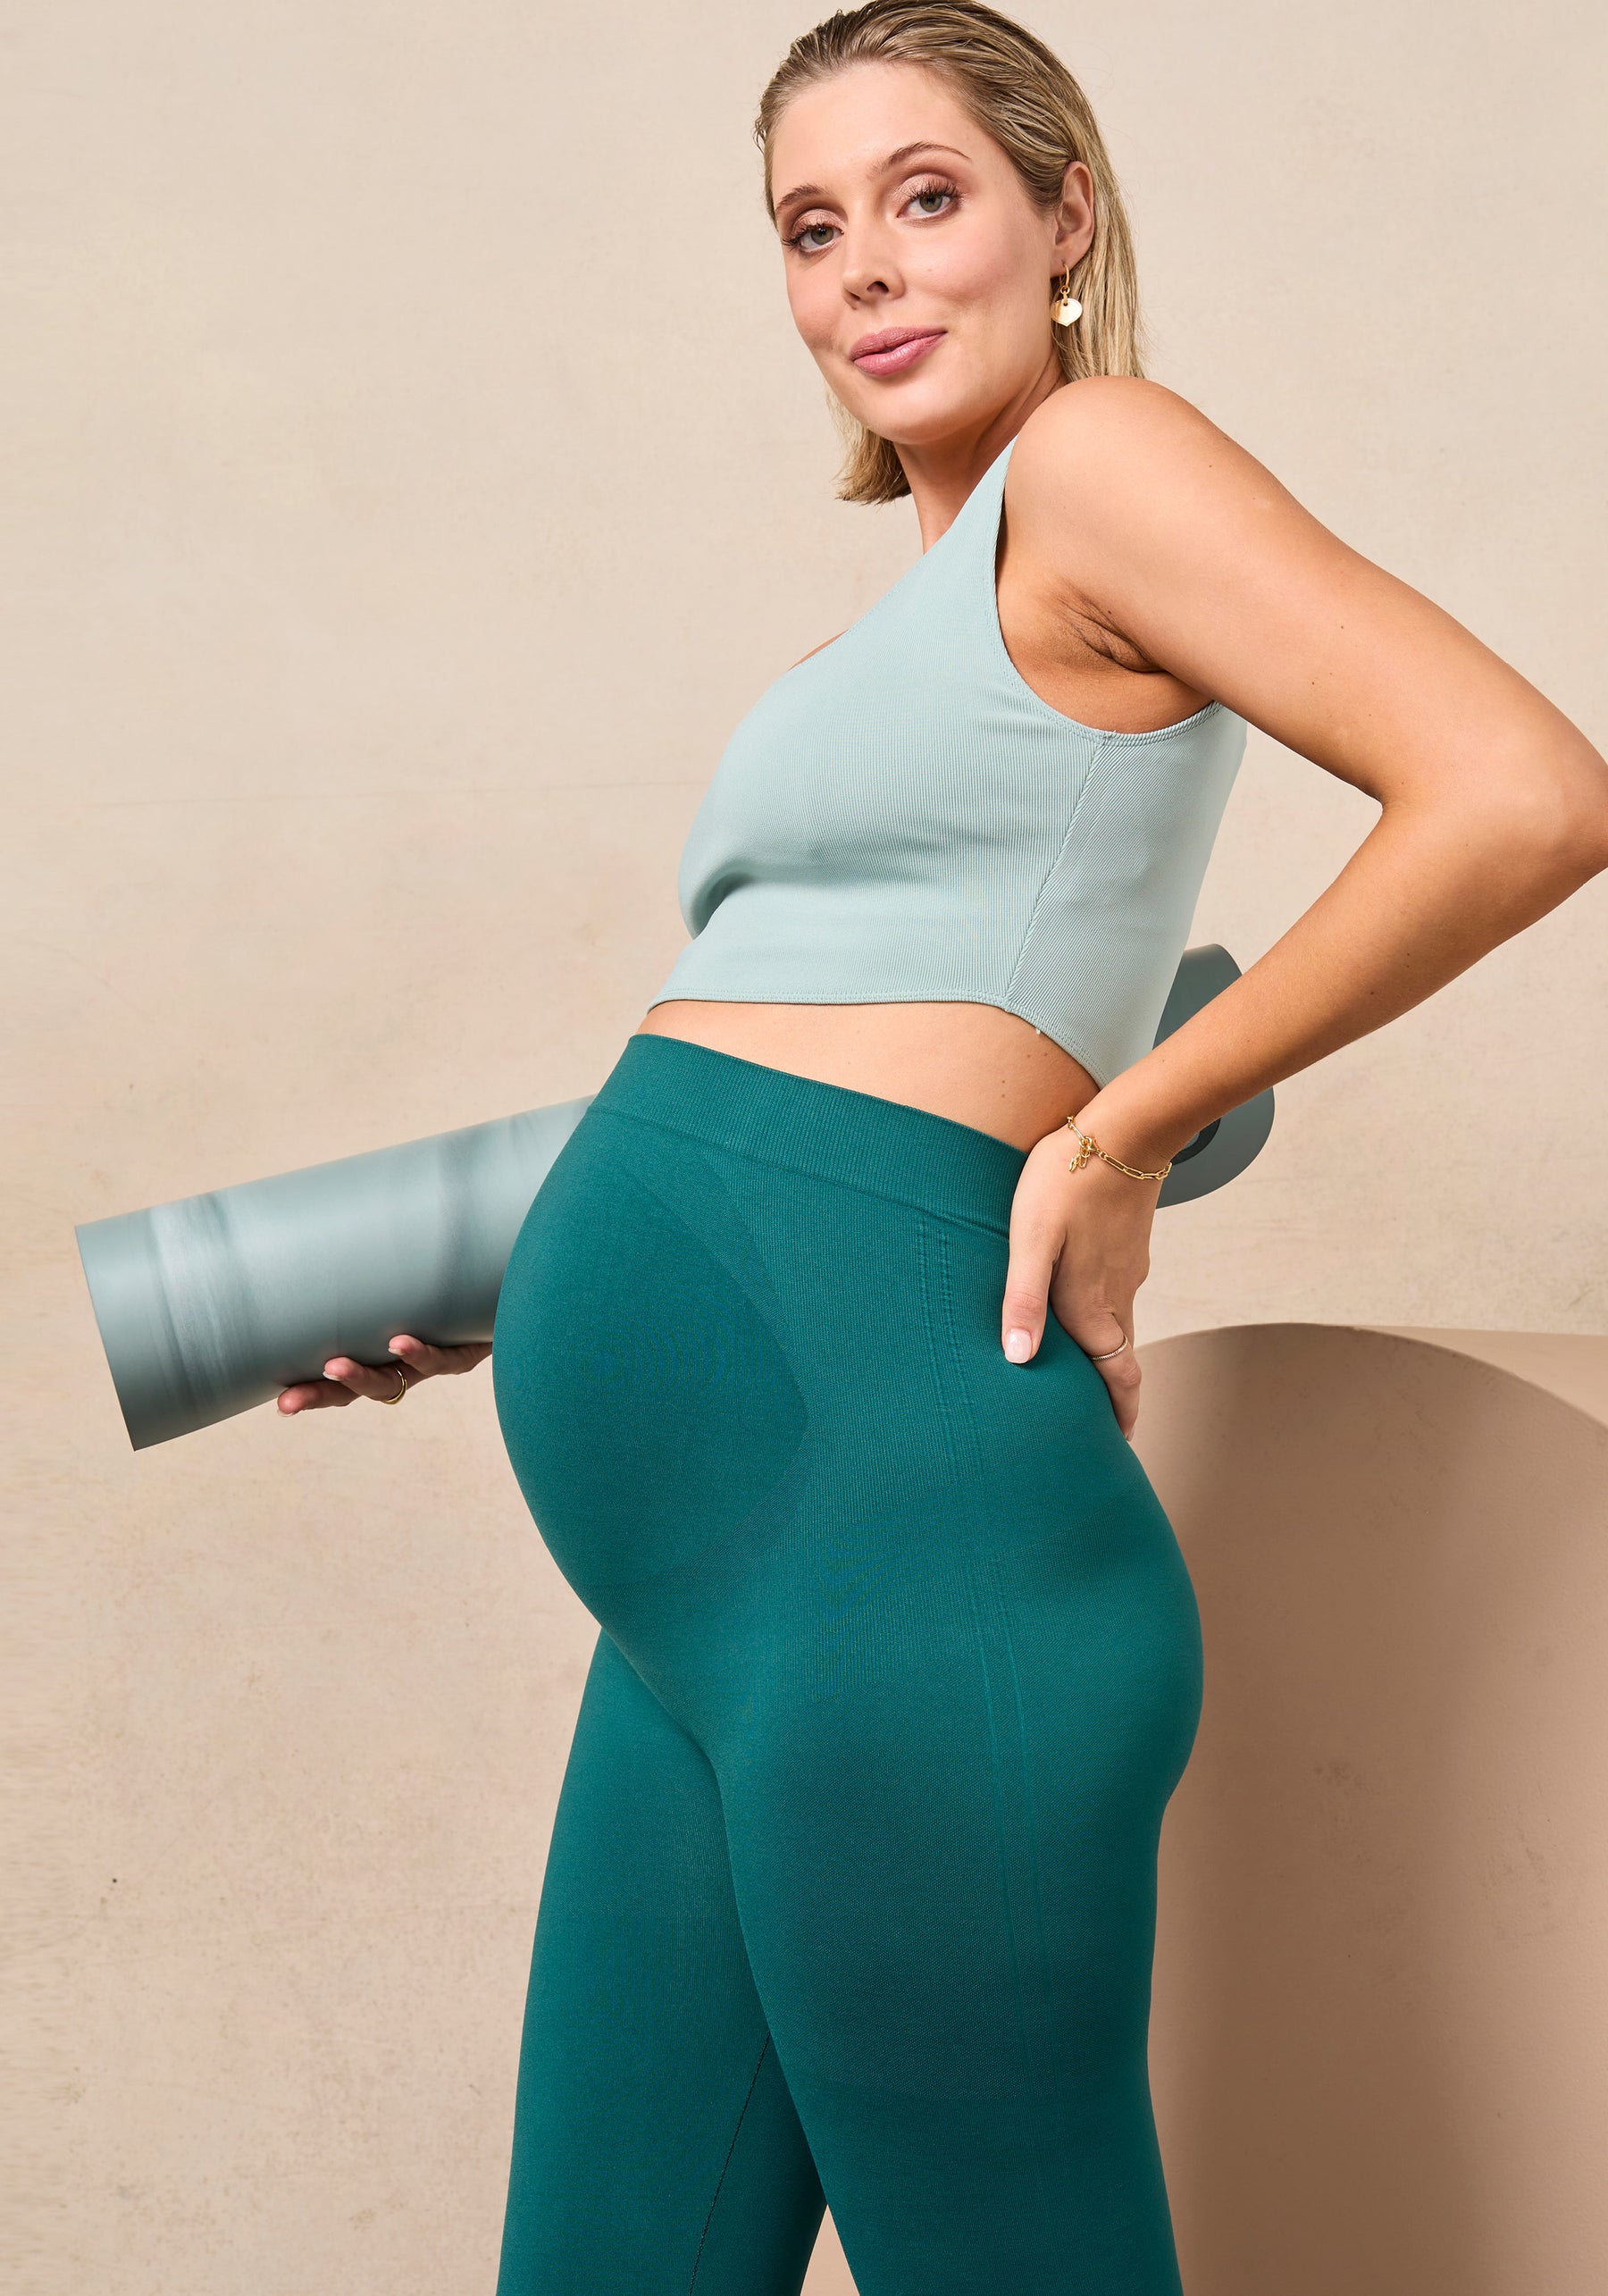 Pregnant Women Slim Leggings Casual Maternity Solid Color High Waist Pants  Pregnancy Pencil Pants Clothing（Asian size, the product is smaller than the  European size of about 2 yards）